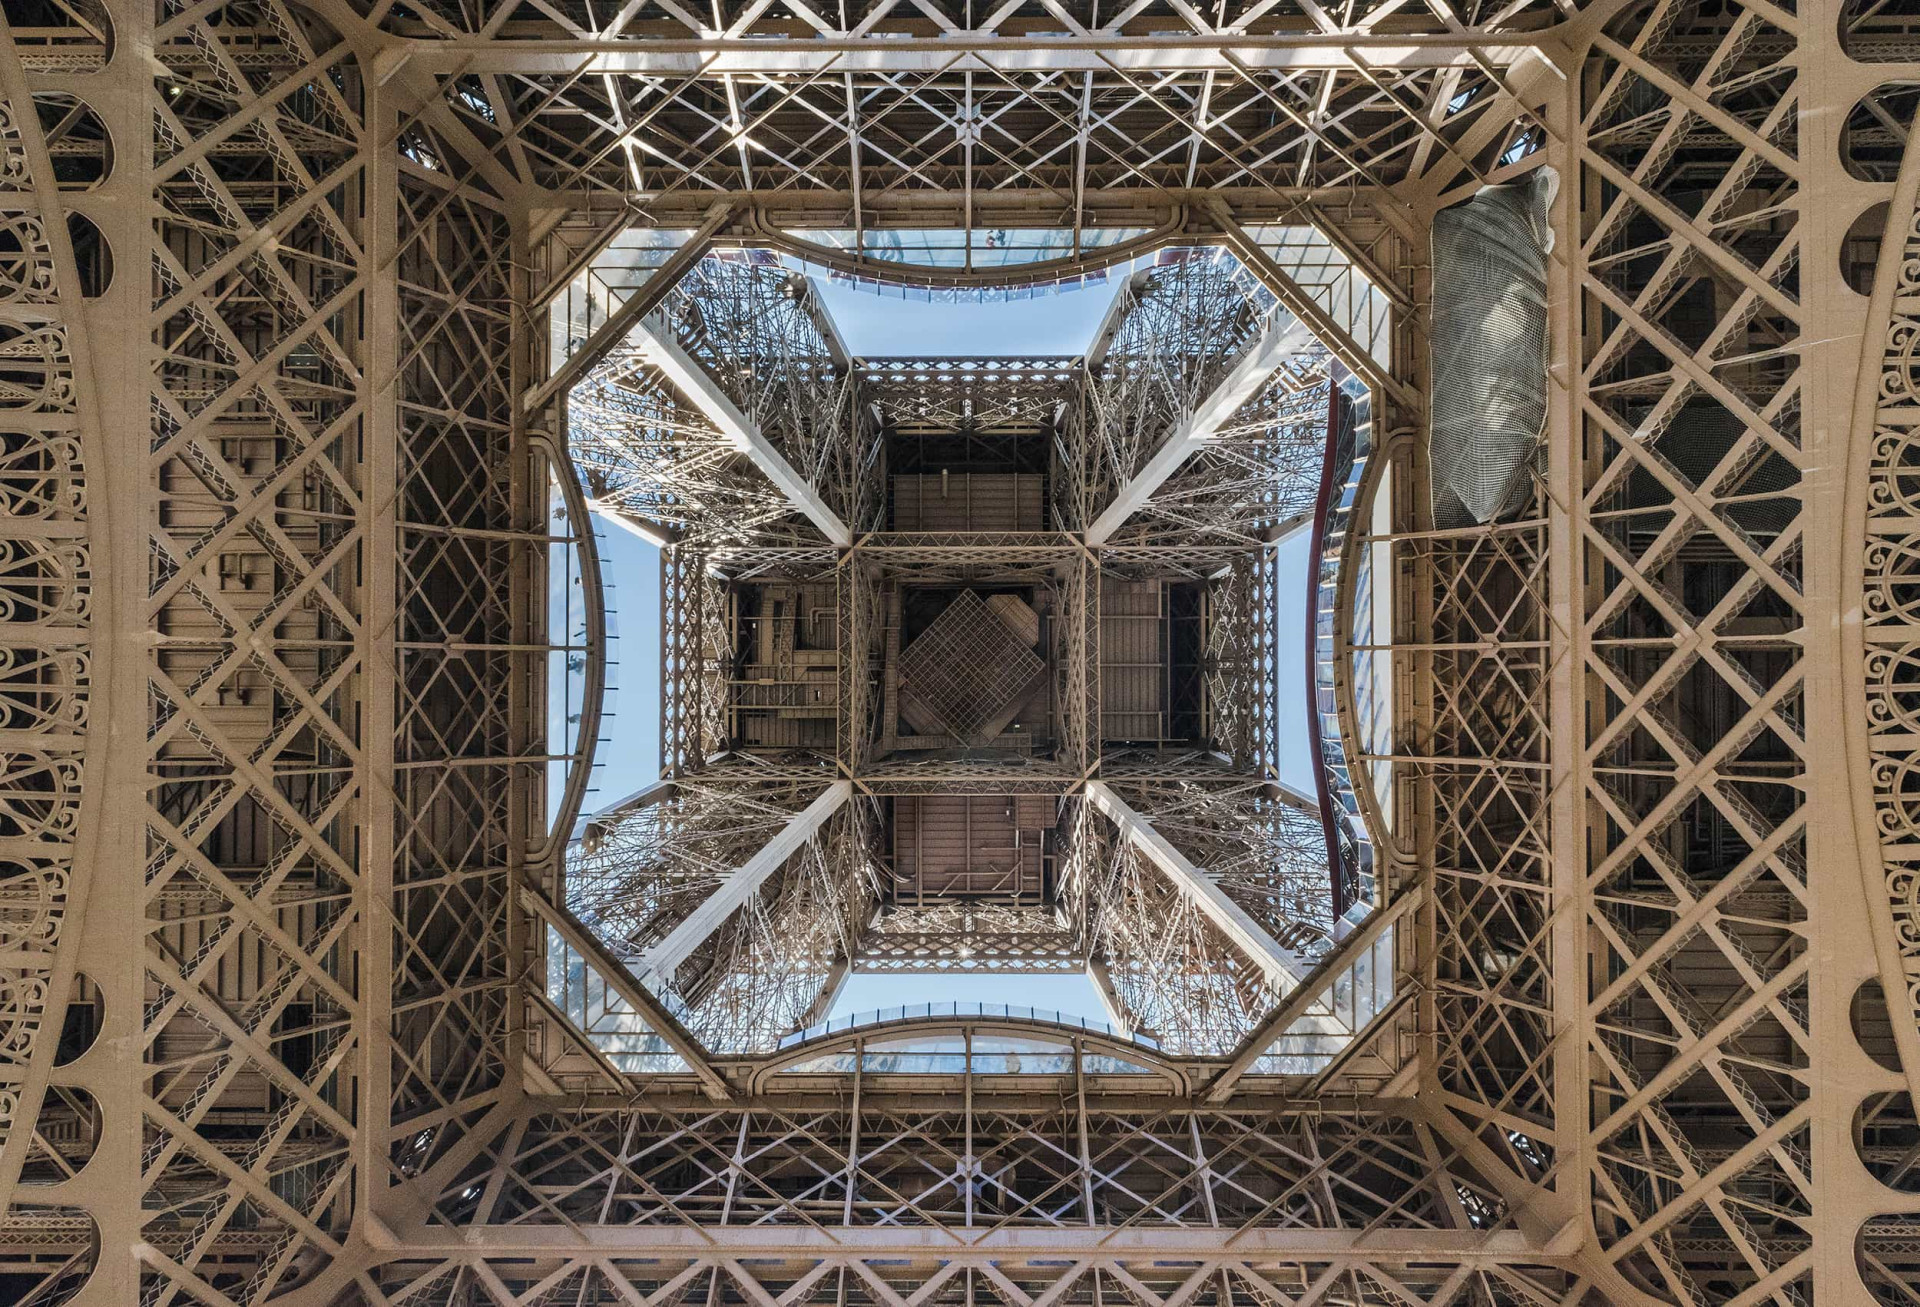 <p>To reach the top of the Eiffel Tower without taking the elevator, you need to climb 1,665 steps. </p><p>You may also like:<a href="https://www.starsinsider.com/n/194952?utm_source=msn.com&utm_medium=display&utm_campaign=referral_description&utm_content=426342v7en-us"> You won't believe these celebrity couples met on blind dates</a></p>